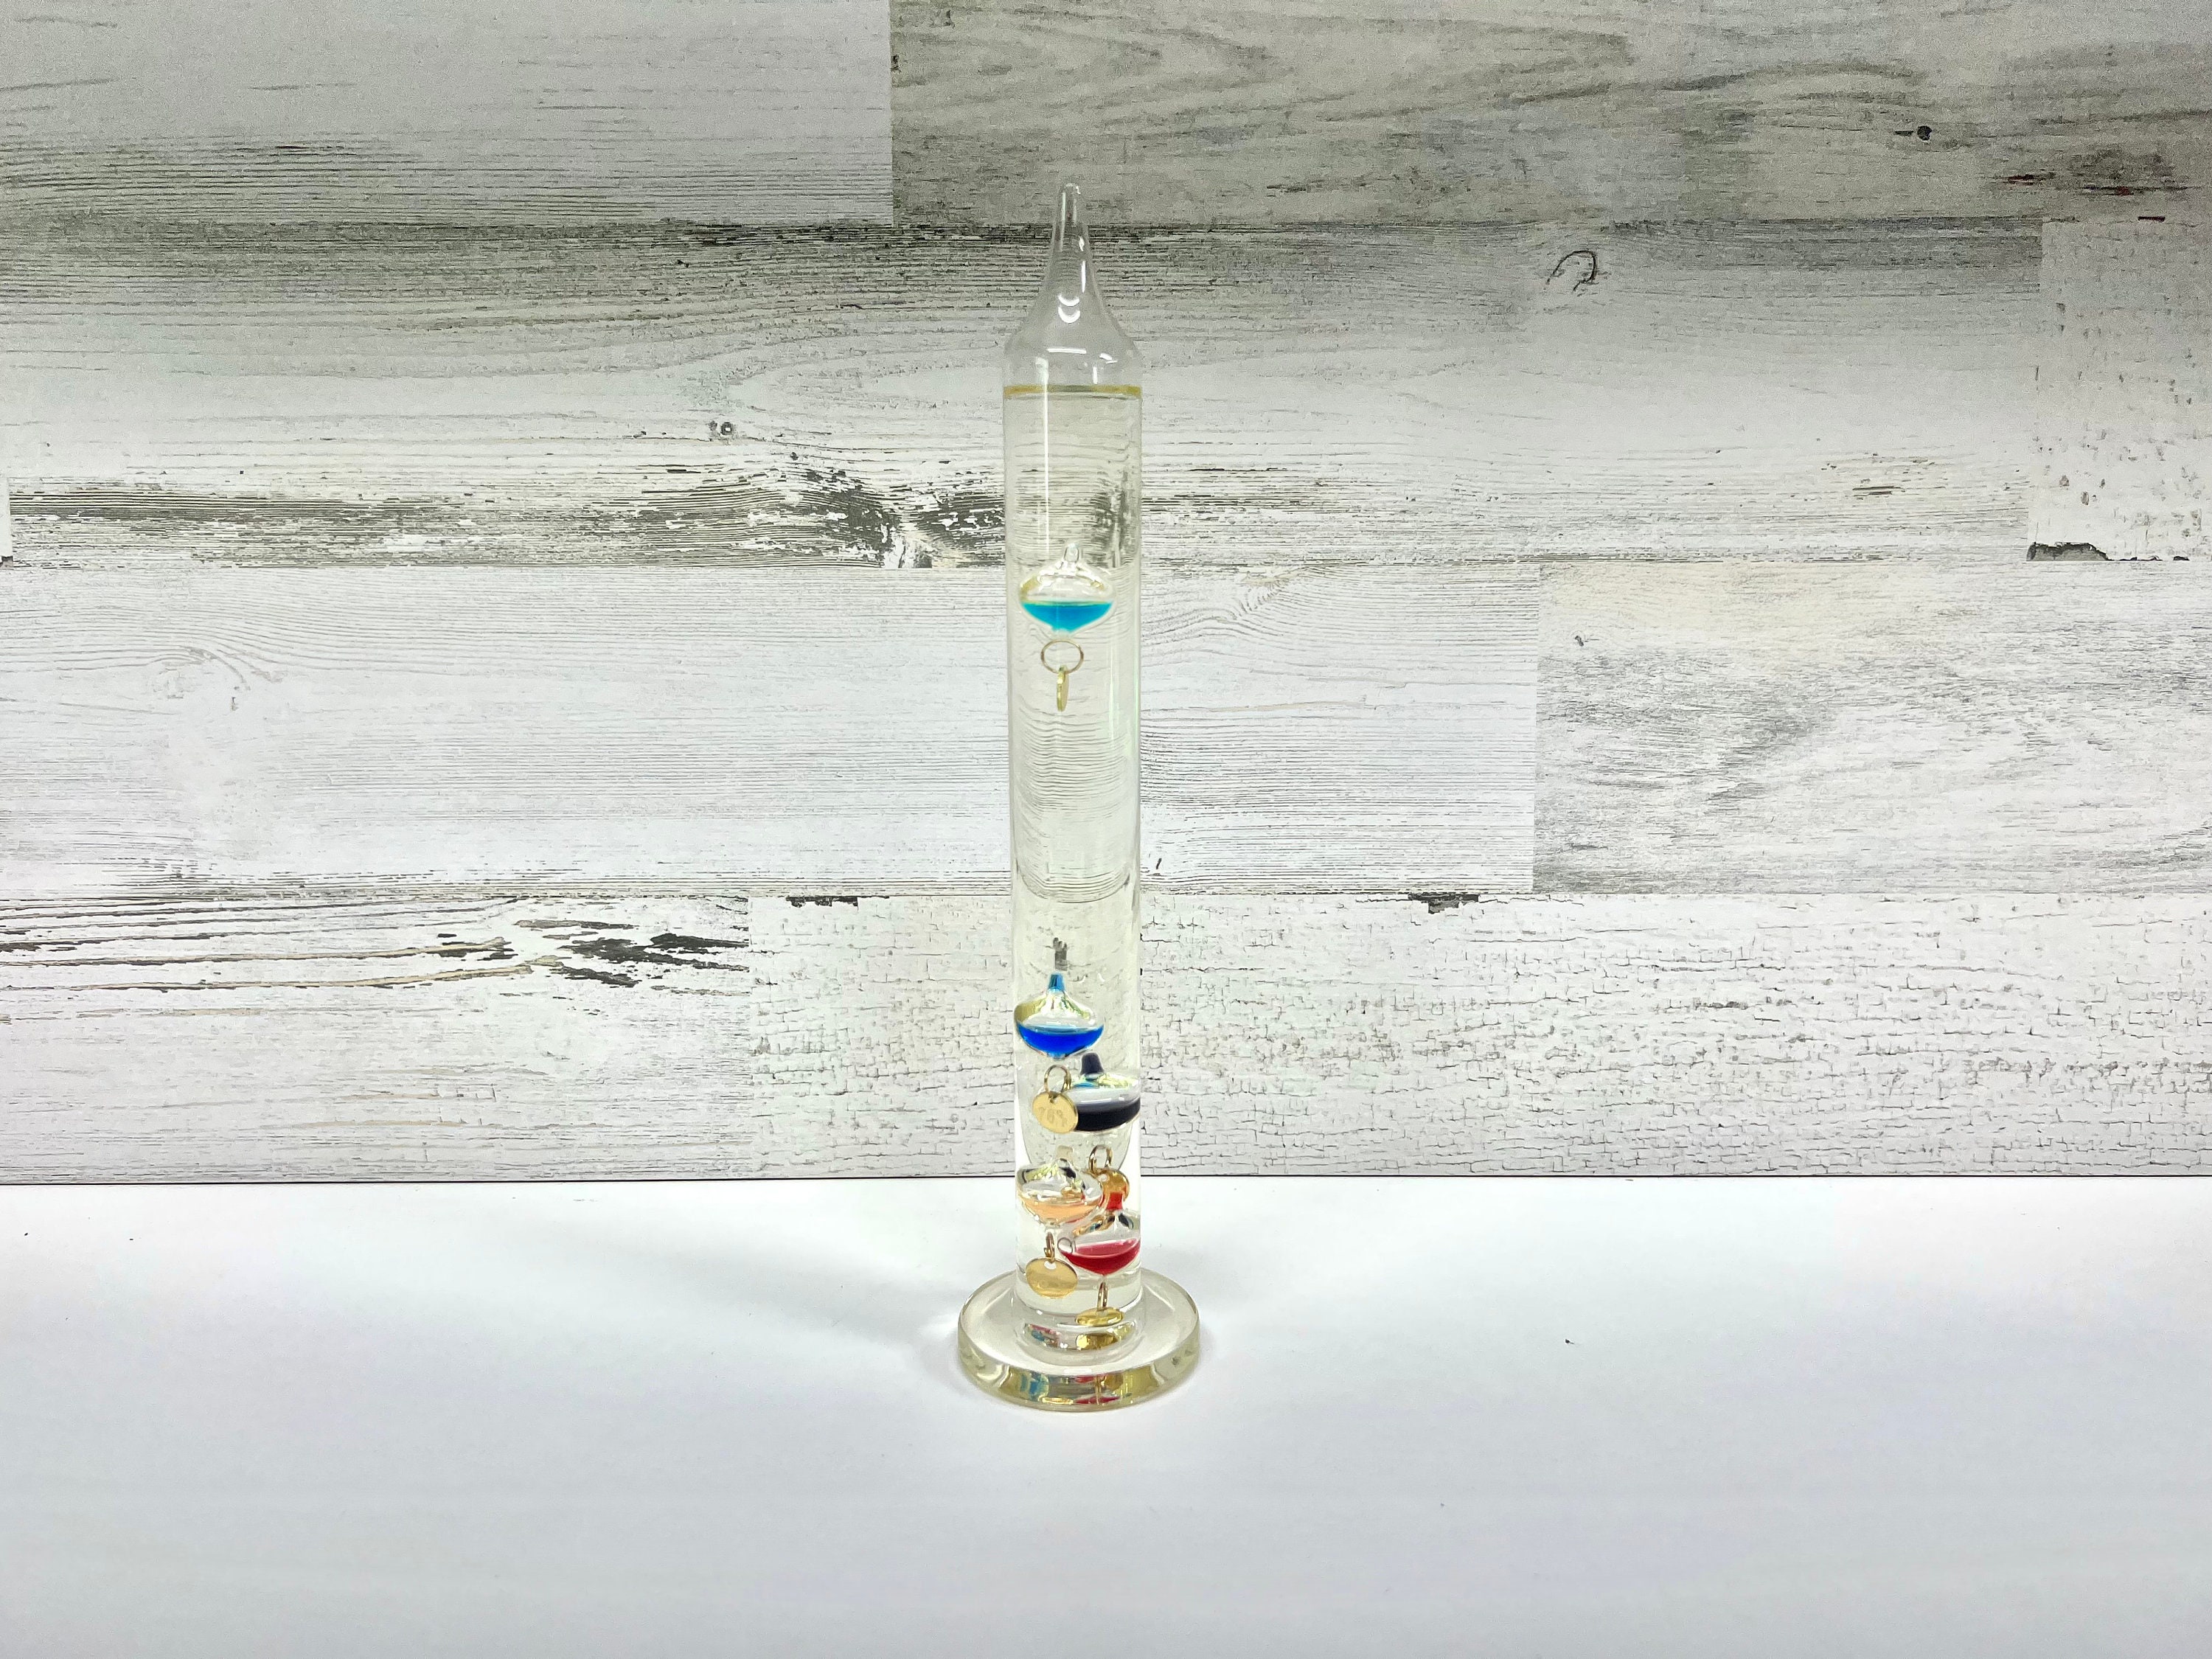 Hanging Galileo Thermometer ON A Metal Stand | Measures temperatures from  18 Degrees Centigrade to 24 Degrees | Also in Fahrenheit | Weather Station  